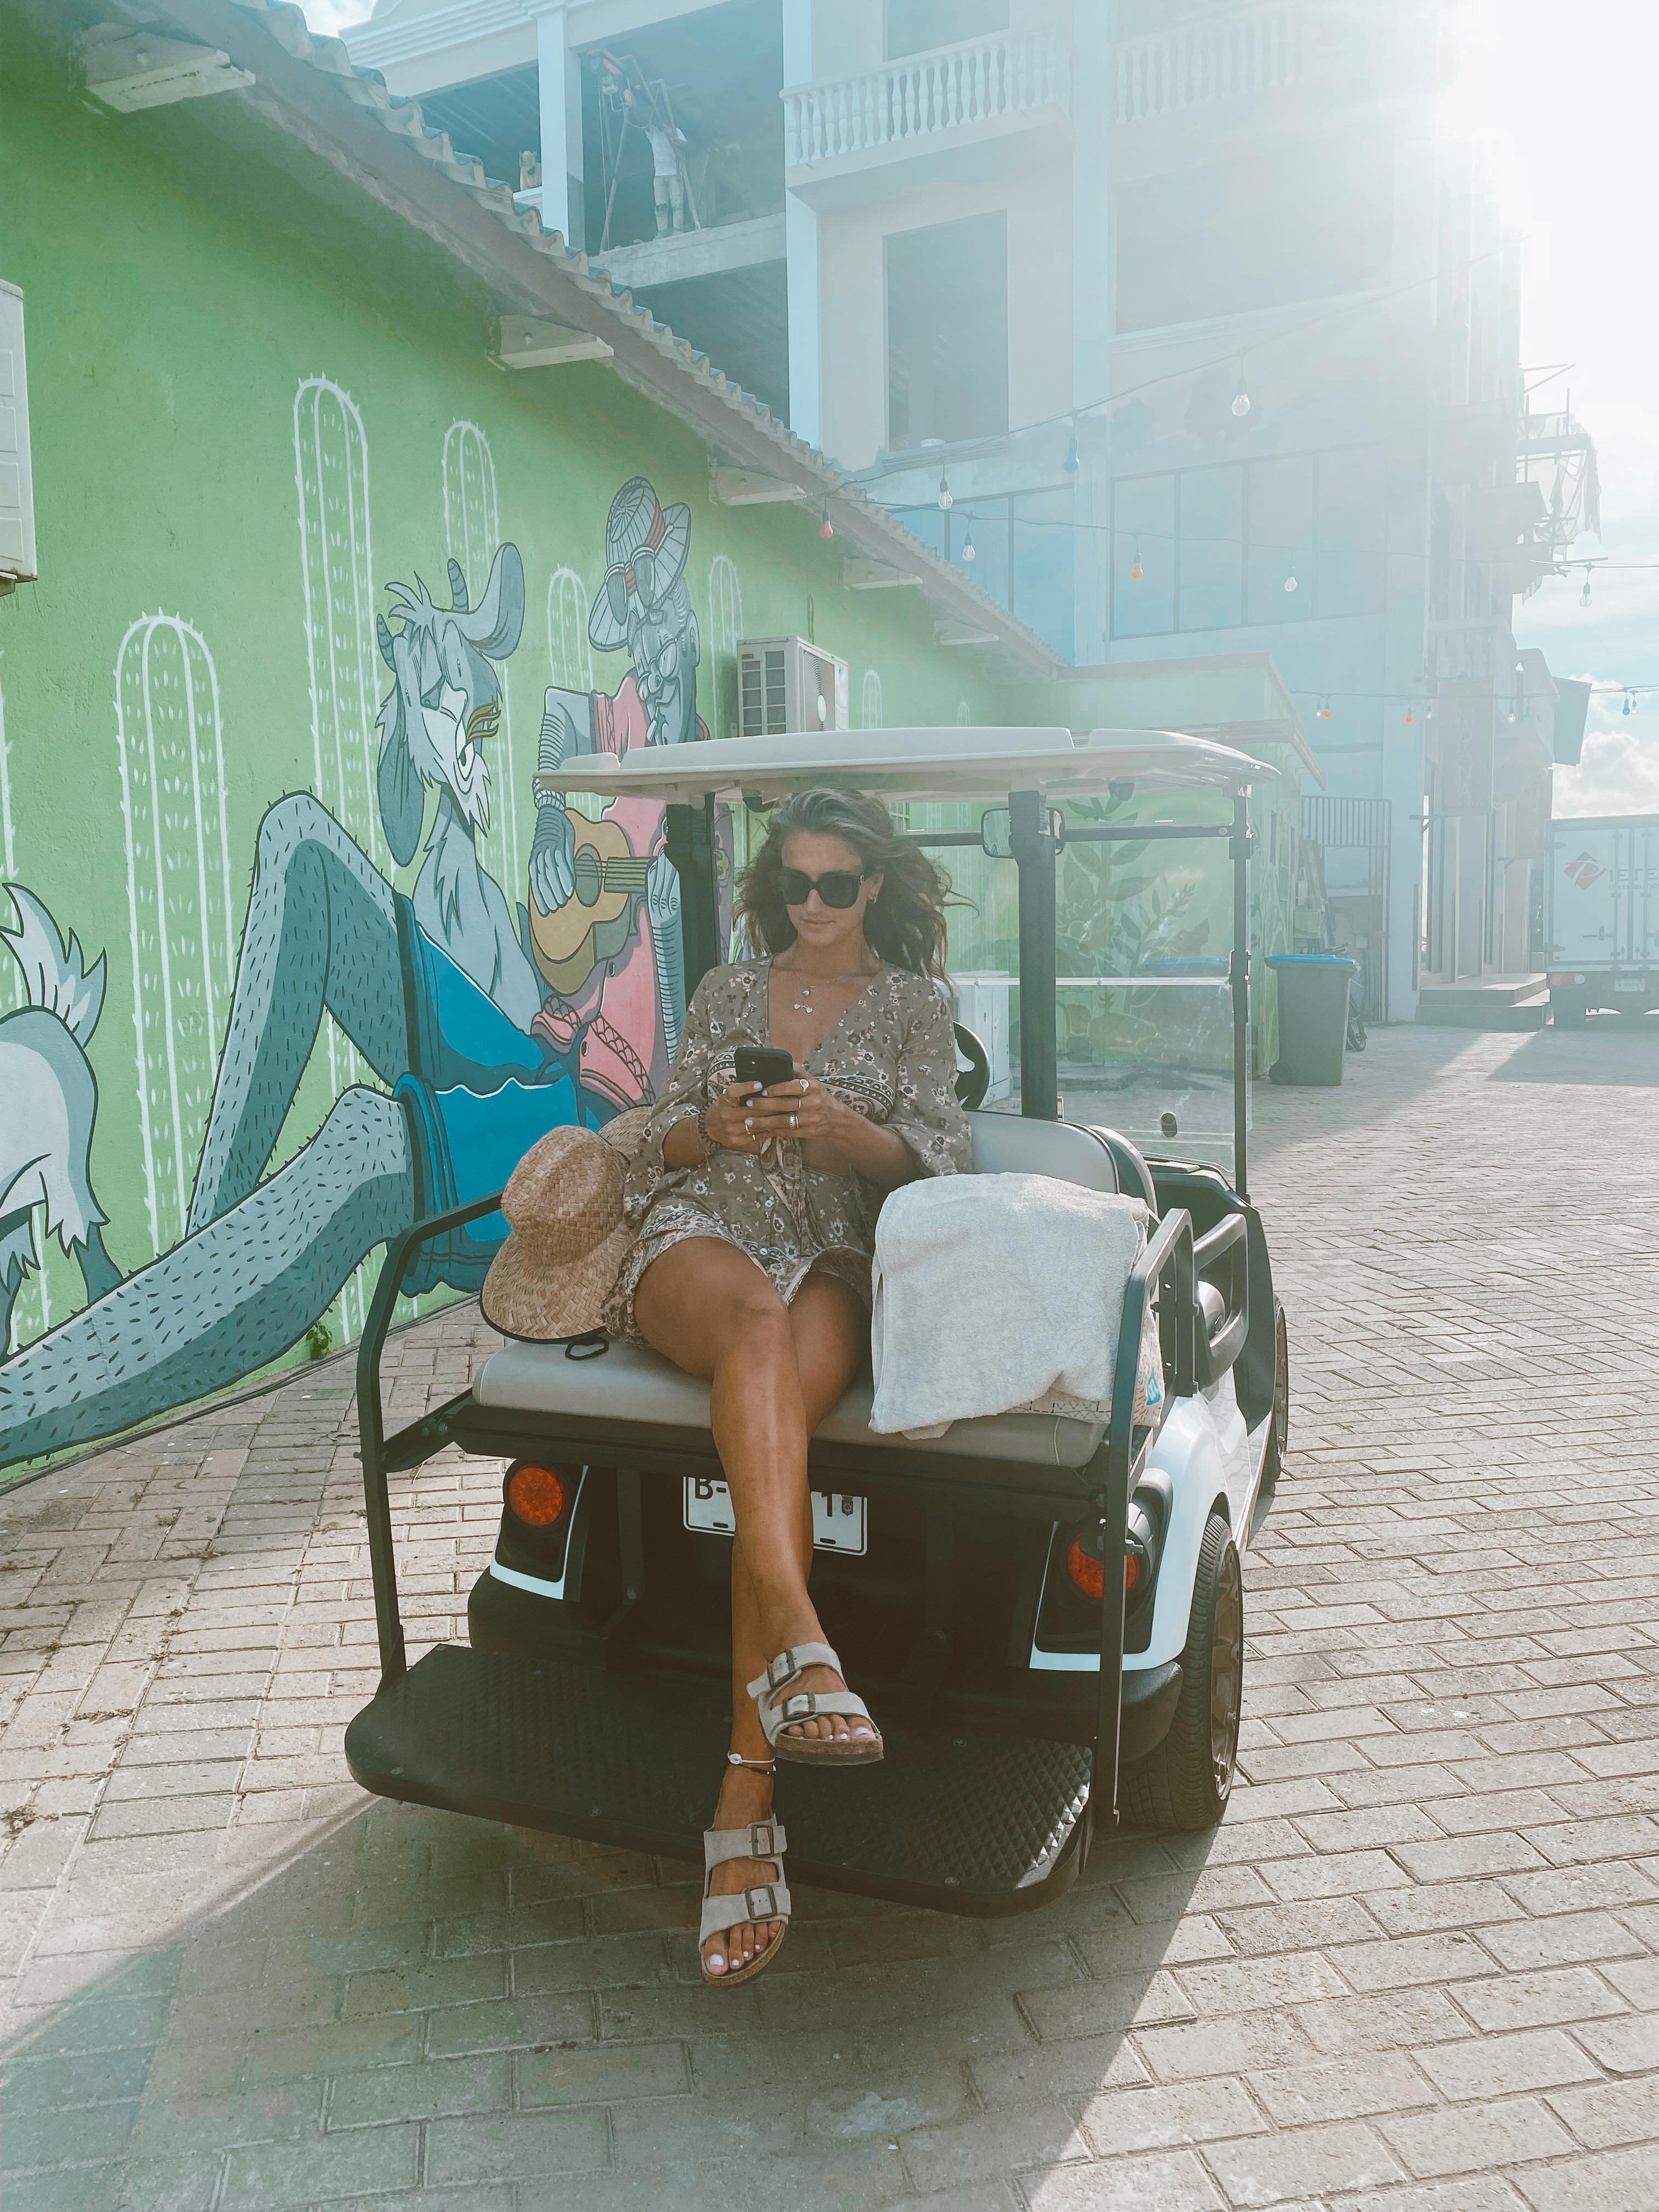 Rent a golfcart, a cheap way to explore bonaire fully.